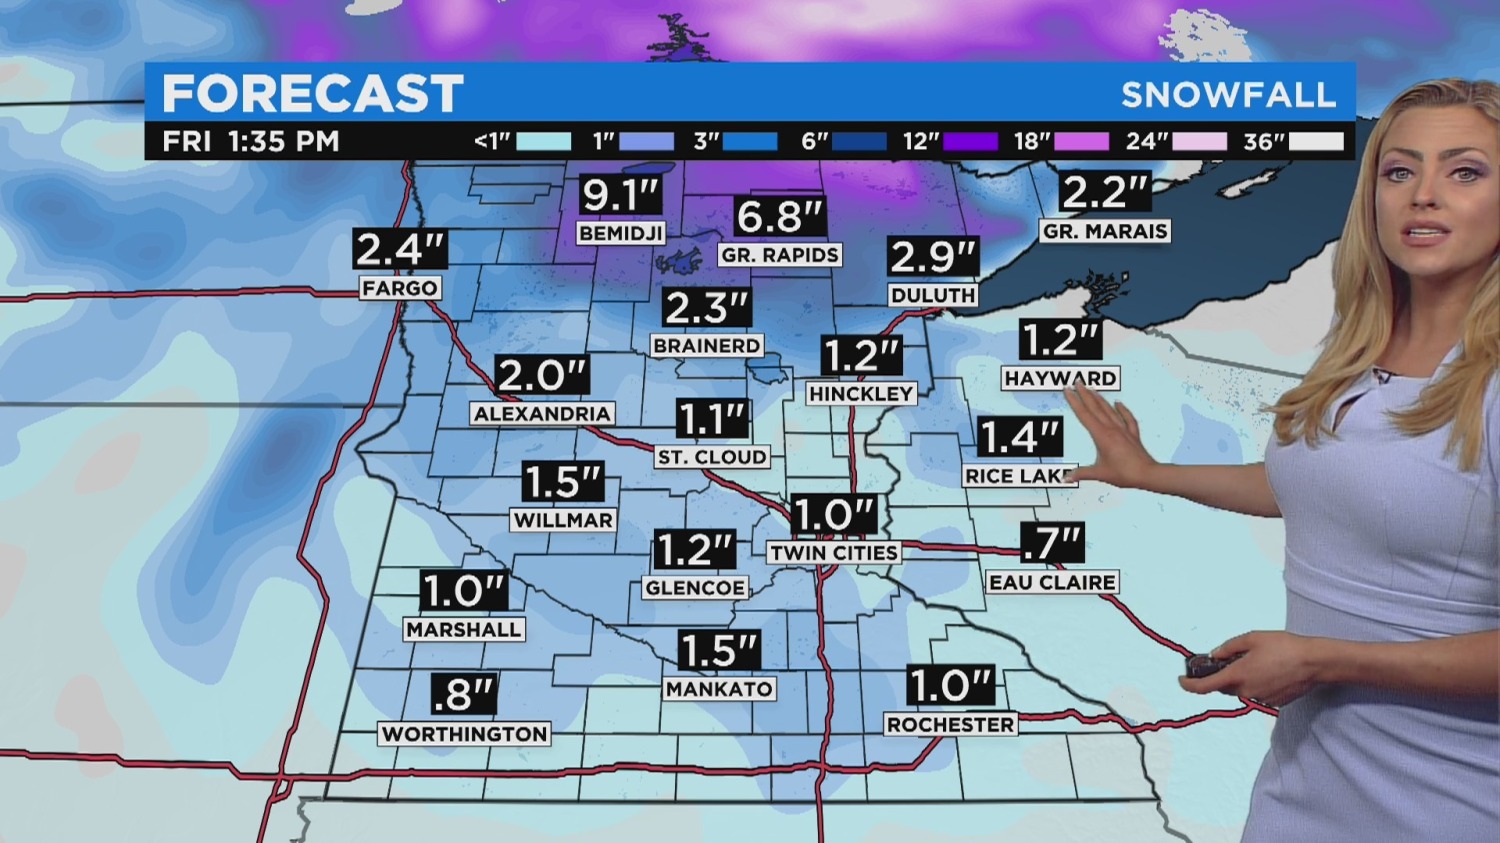 Minnesota Weather: After Wednesday Soaking Snowfall Expected Early